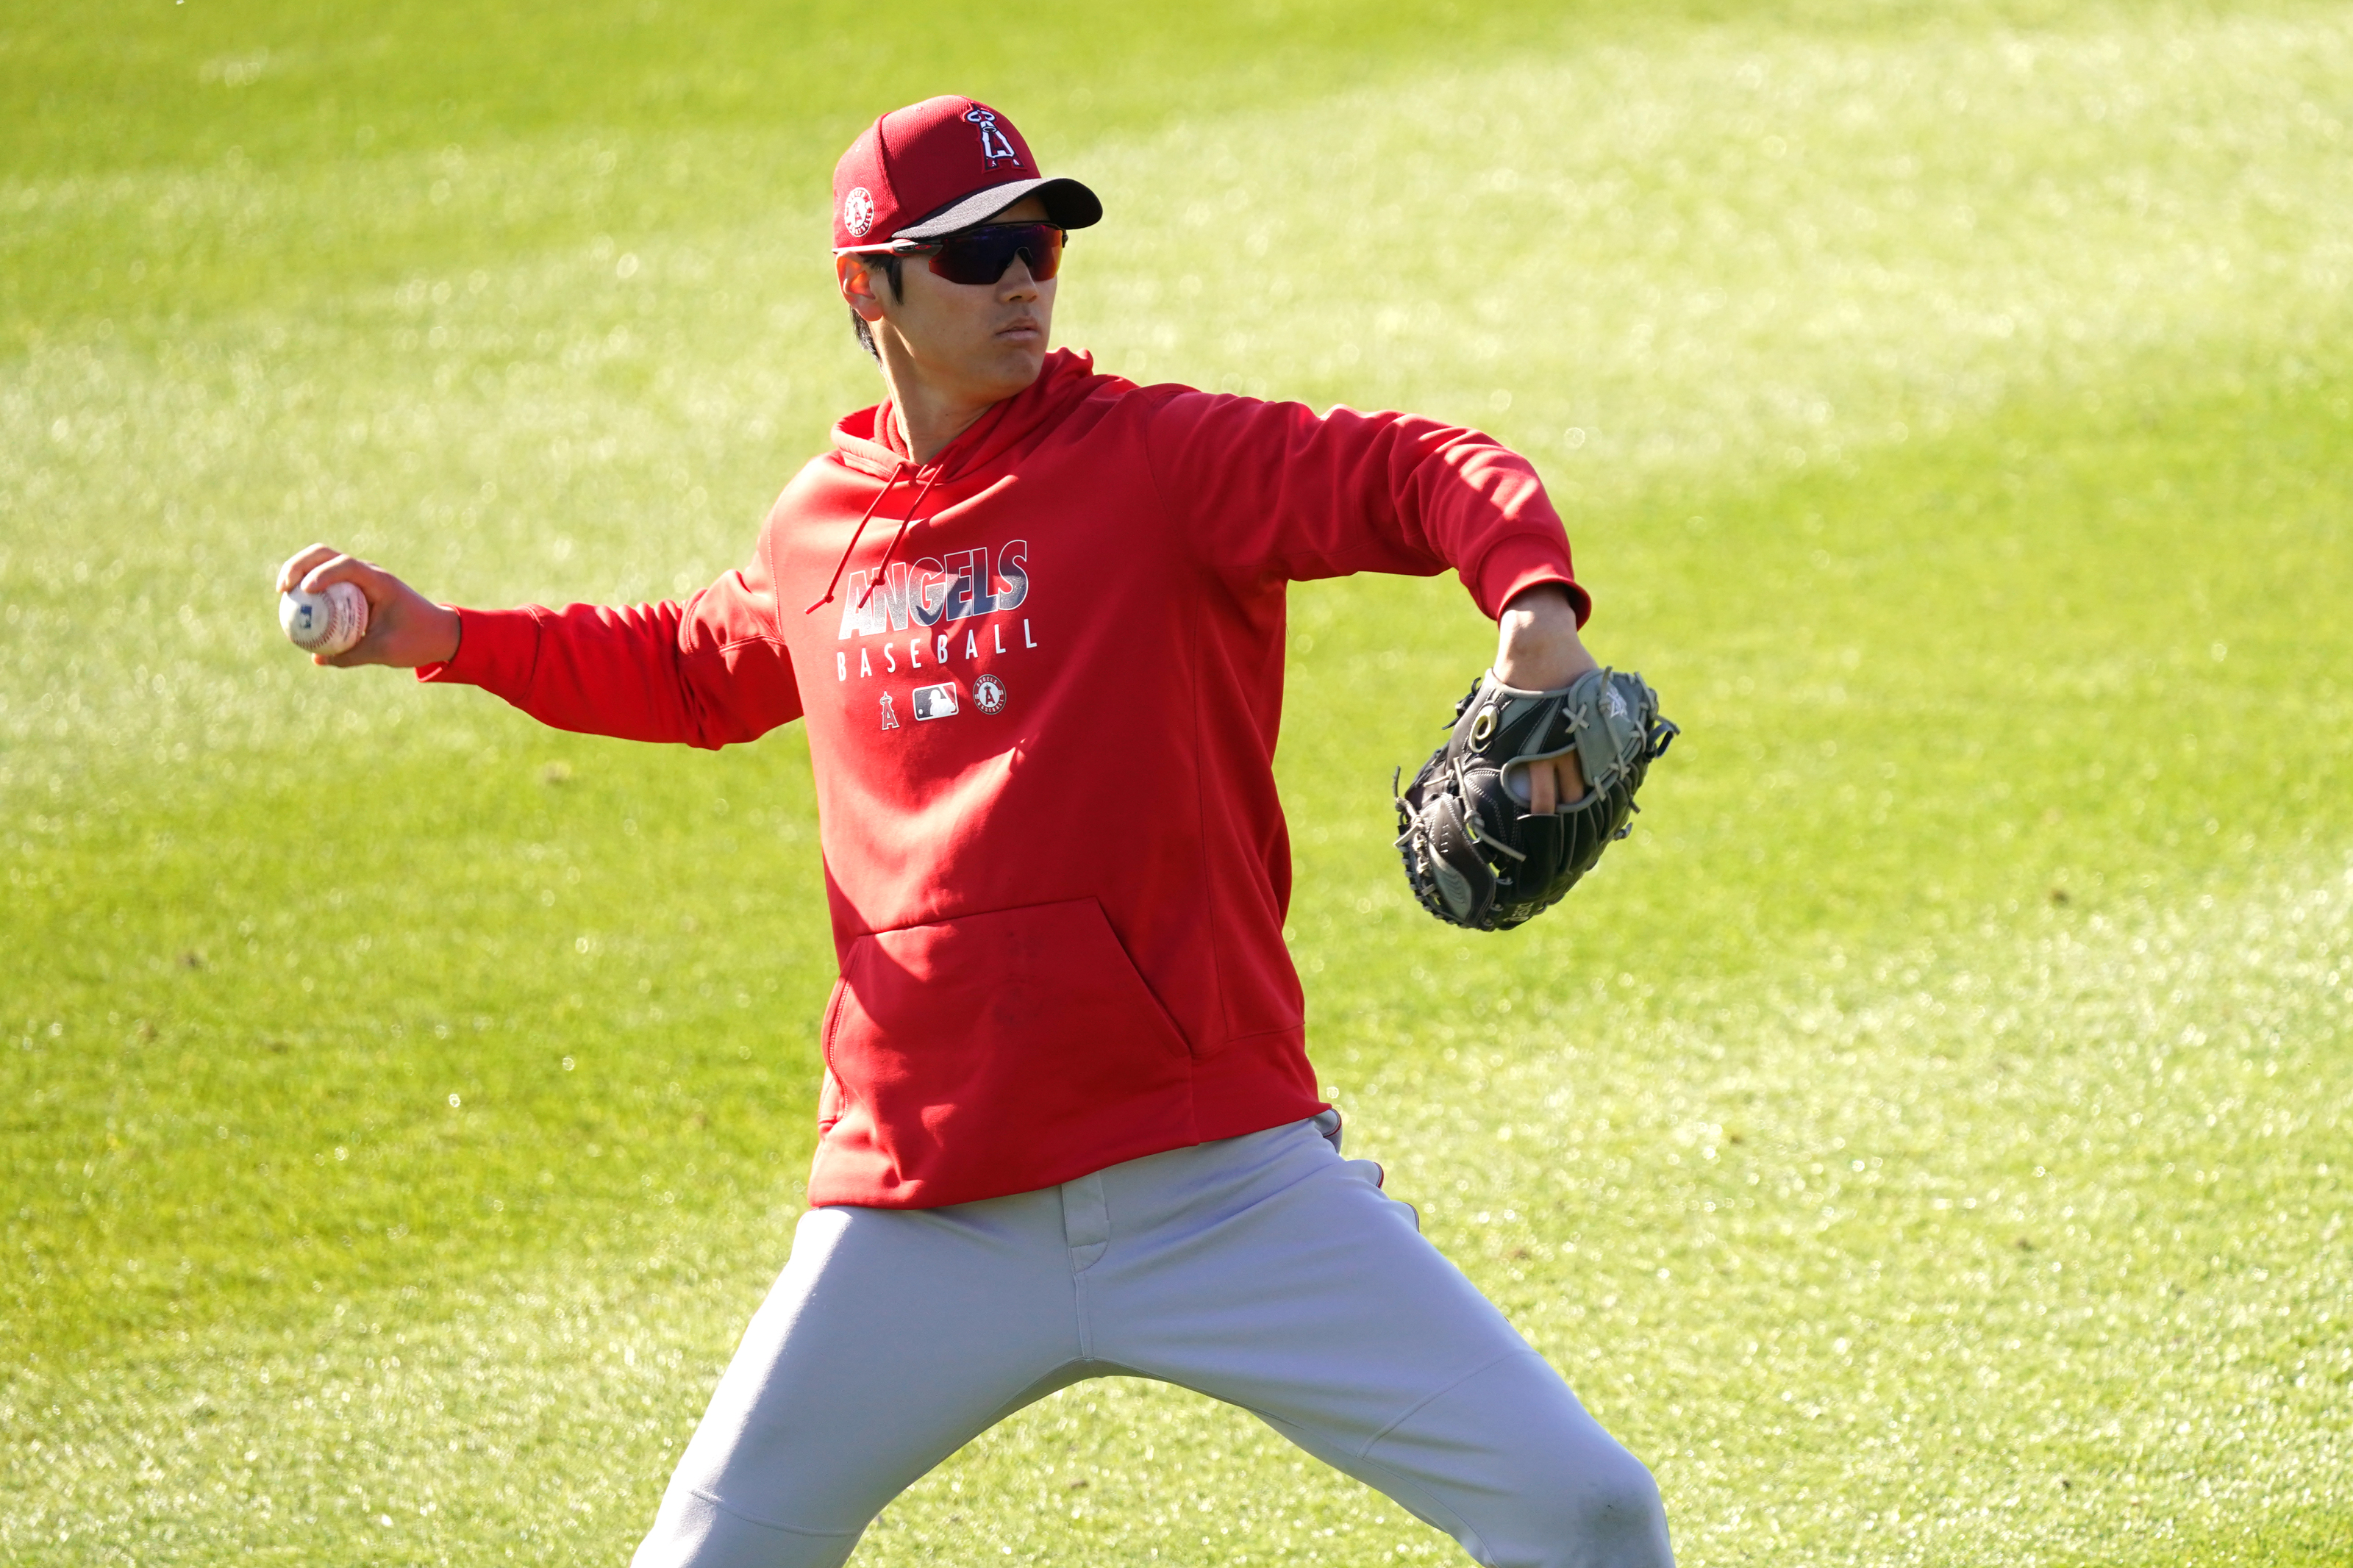 Los Angeles Angels: Shohei Ohtani getting closer to return